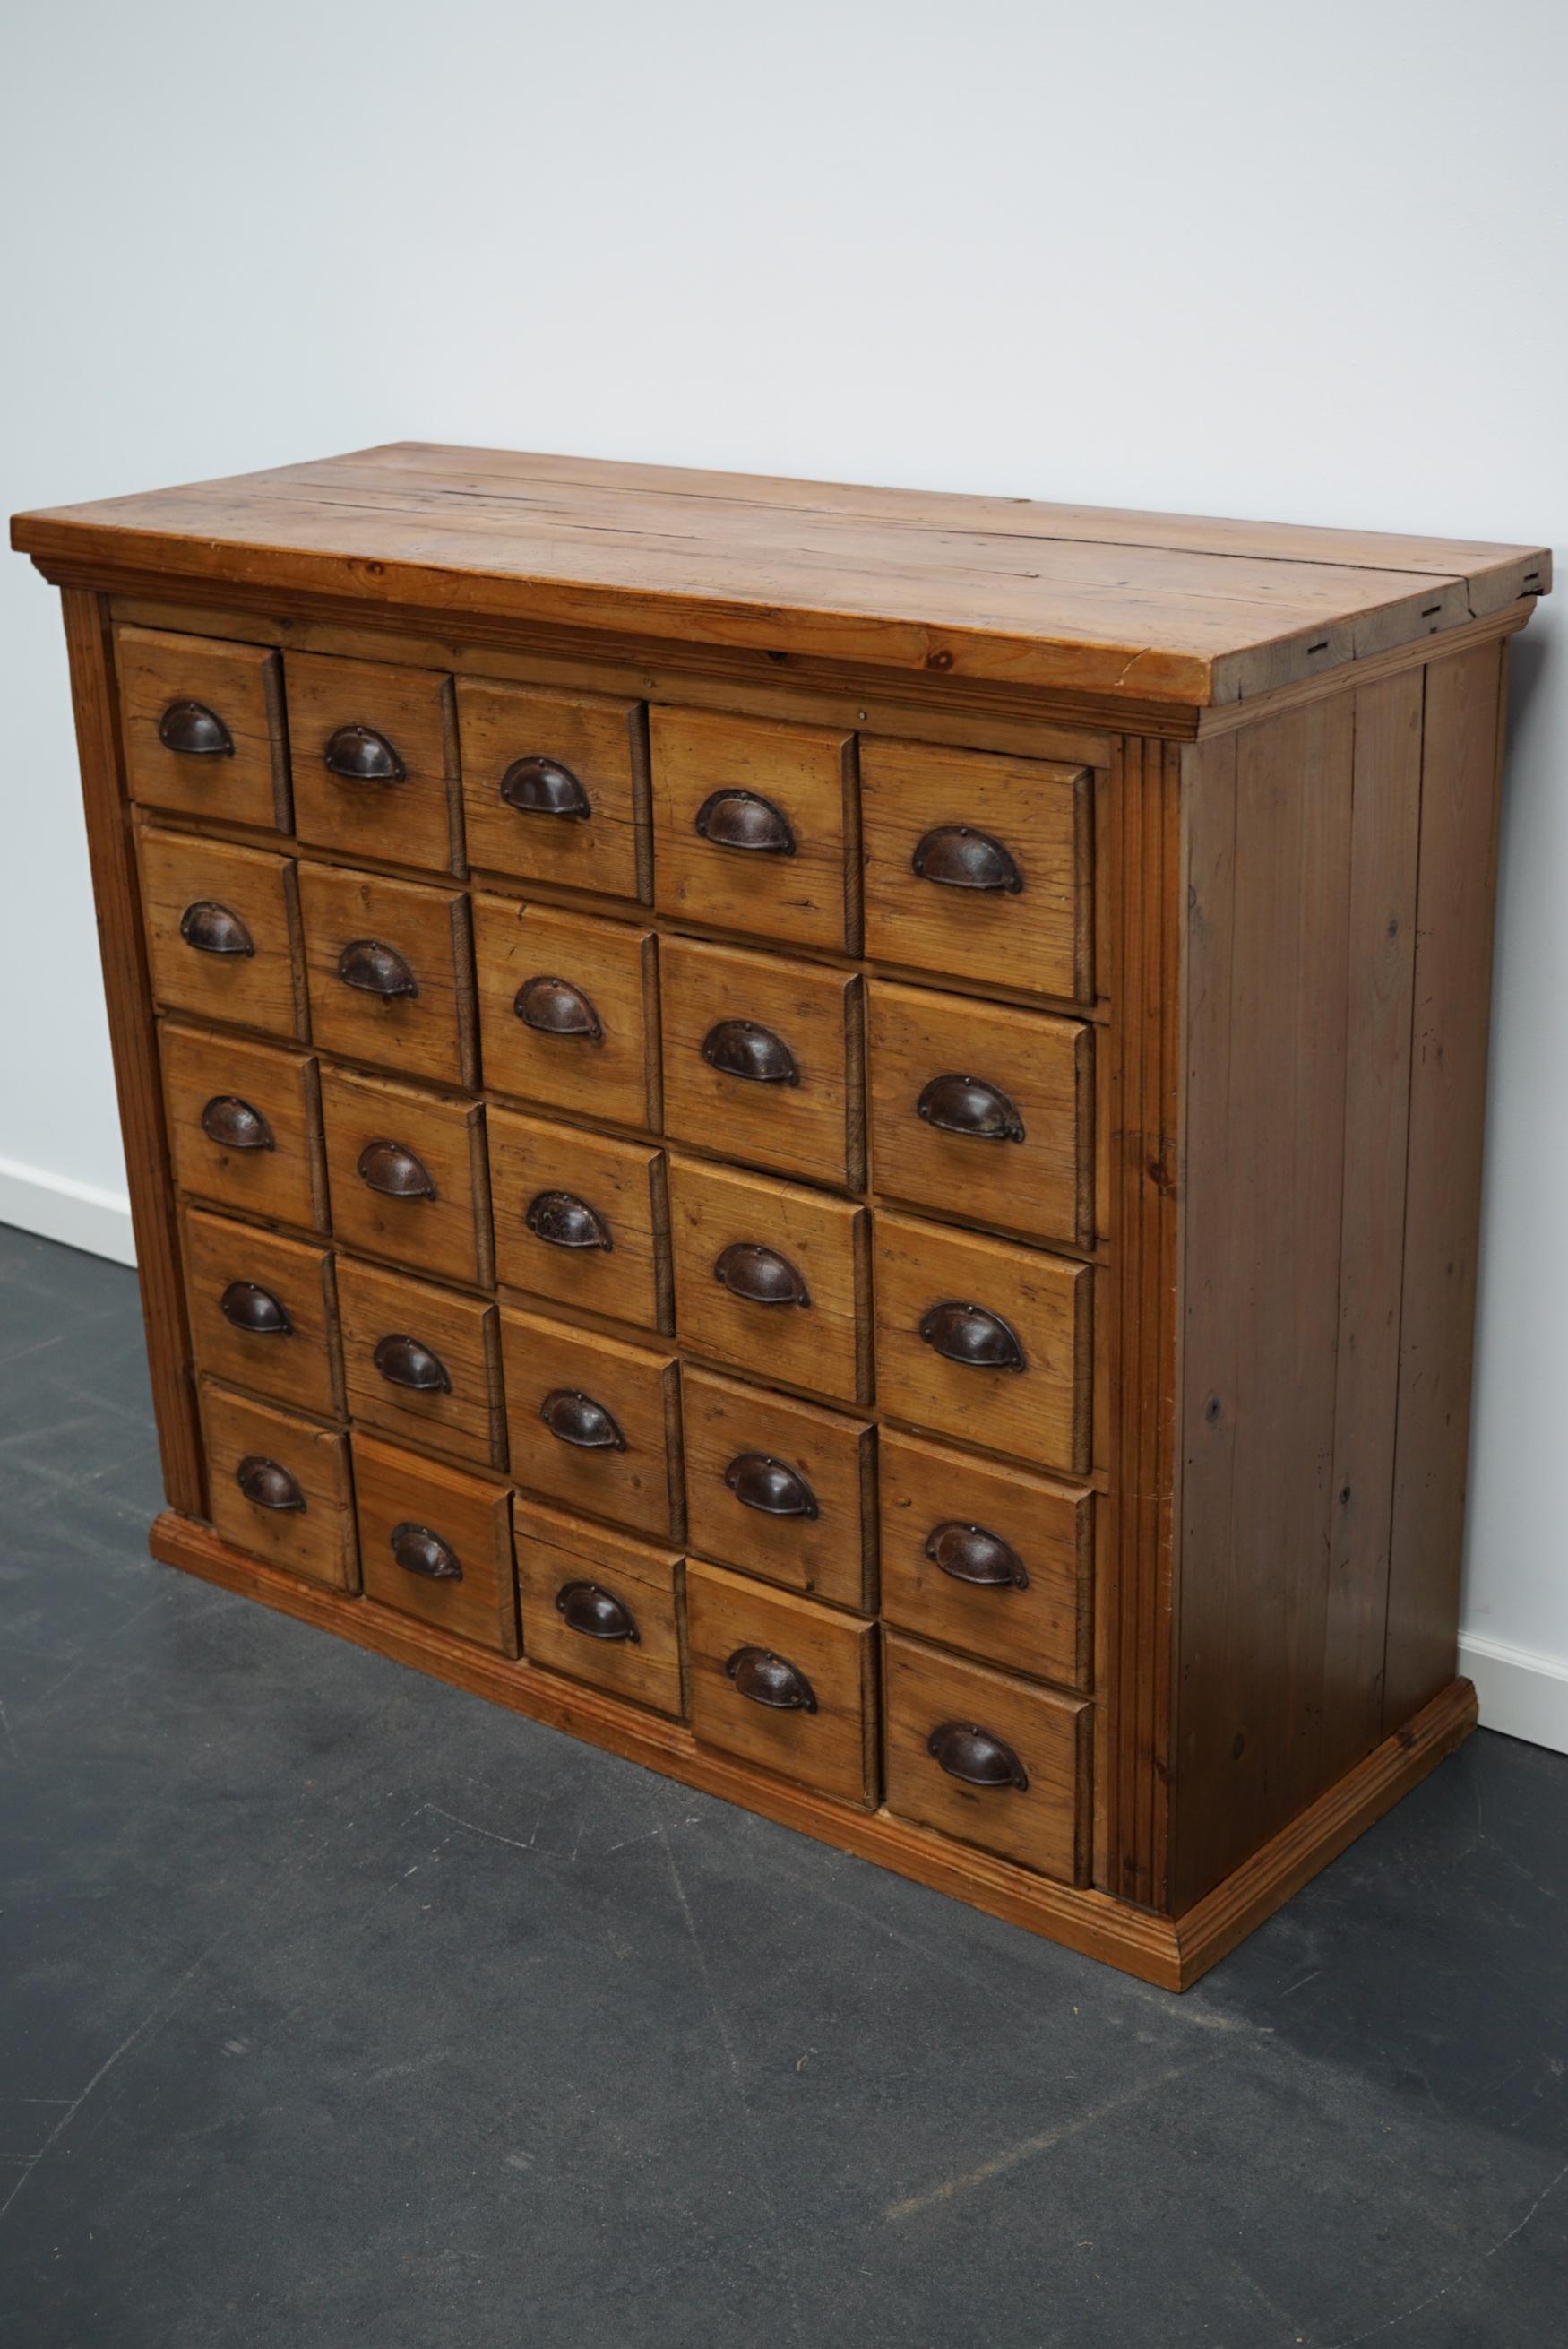 This apothecary cabinet was made circa mid 20th century in France. The piece is made from pine and features 25 drawers with metal cup handles. The interior dimensions of the drawers are: DWH 33 x 13 x 12 cm.